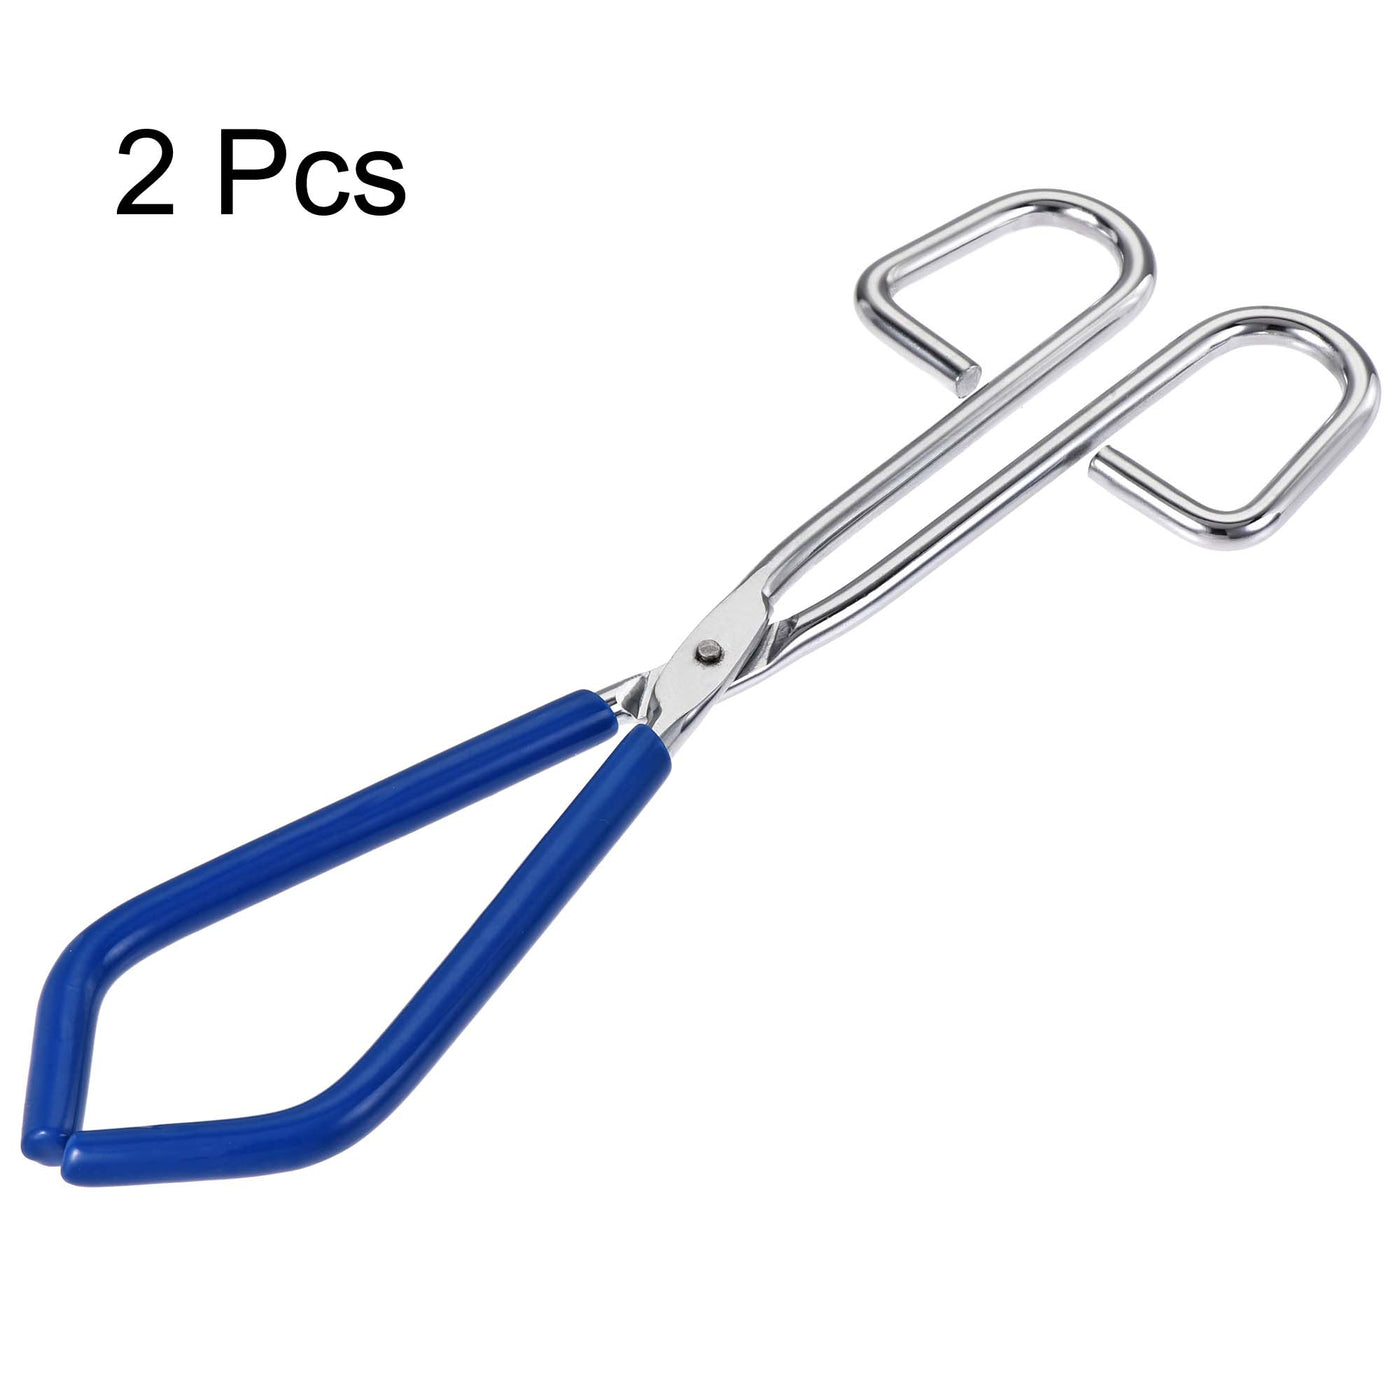 uxcell Uxcell Lab Beaker Tongs Stainless Steel Chrome Plated 10-inch Opens up to 200mm Width Blue 2Pcs